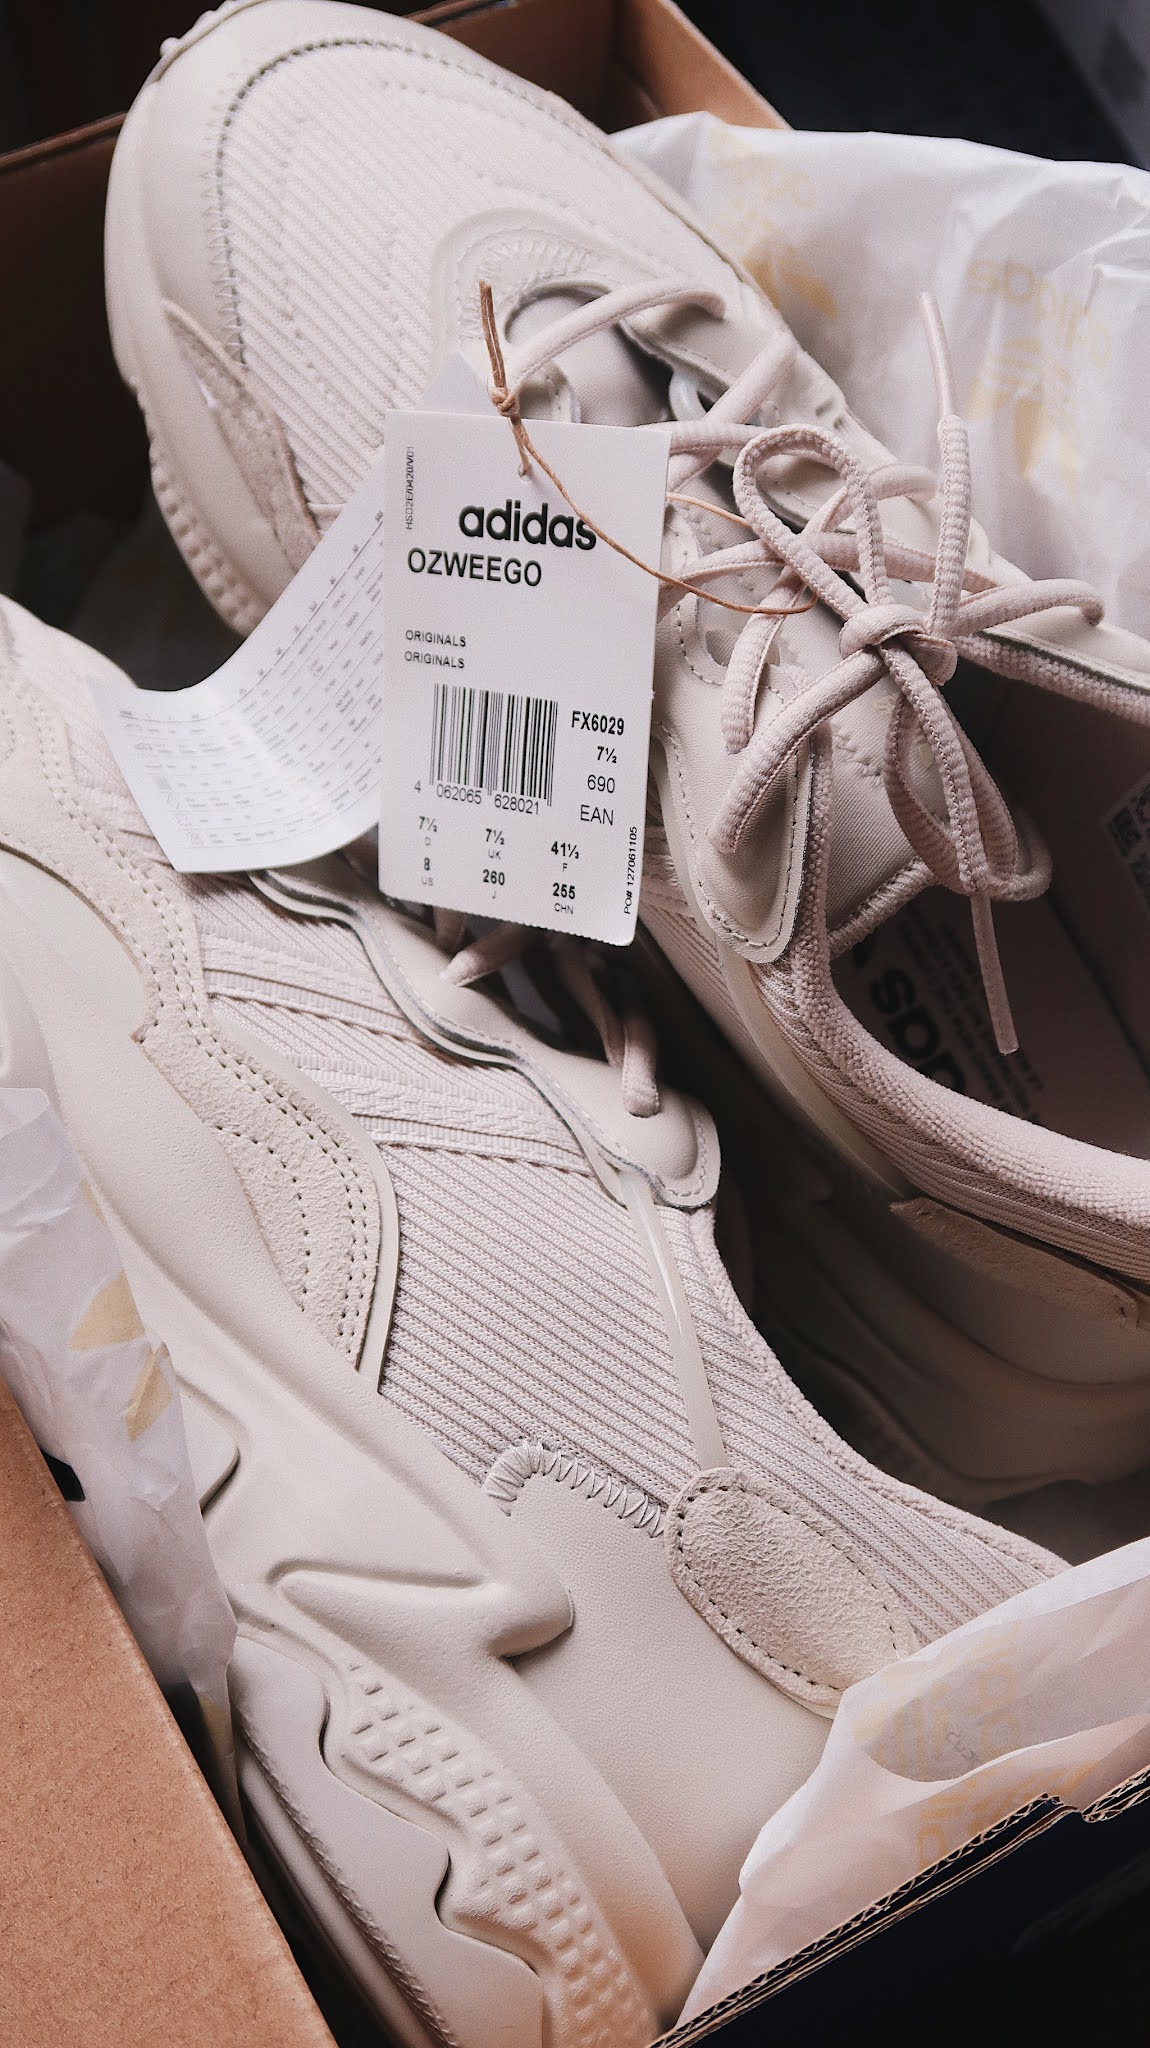 Adidas Ozweego (Beige) Review — Giselle